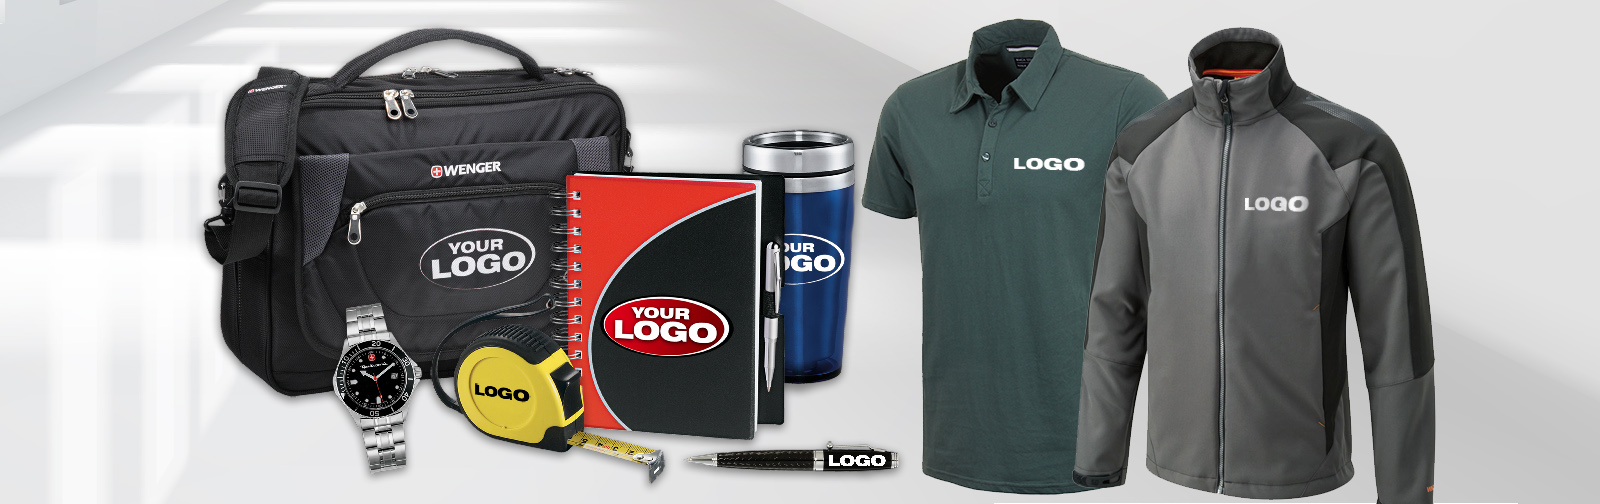 Image-promotional-products-branding.jpg